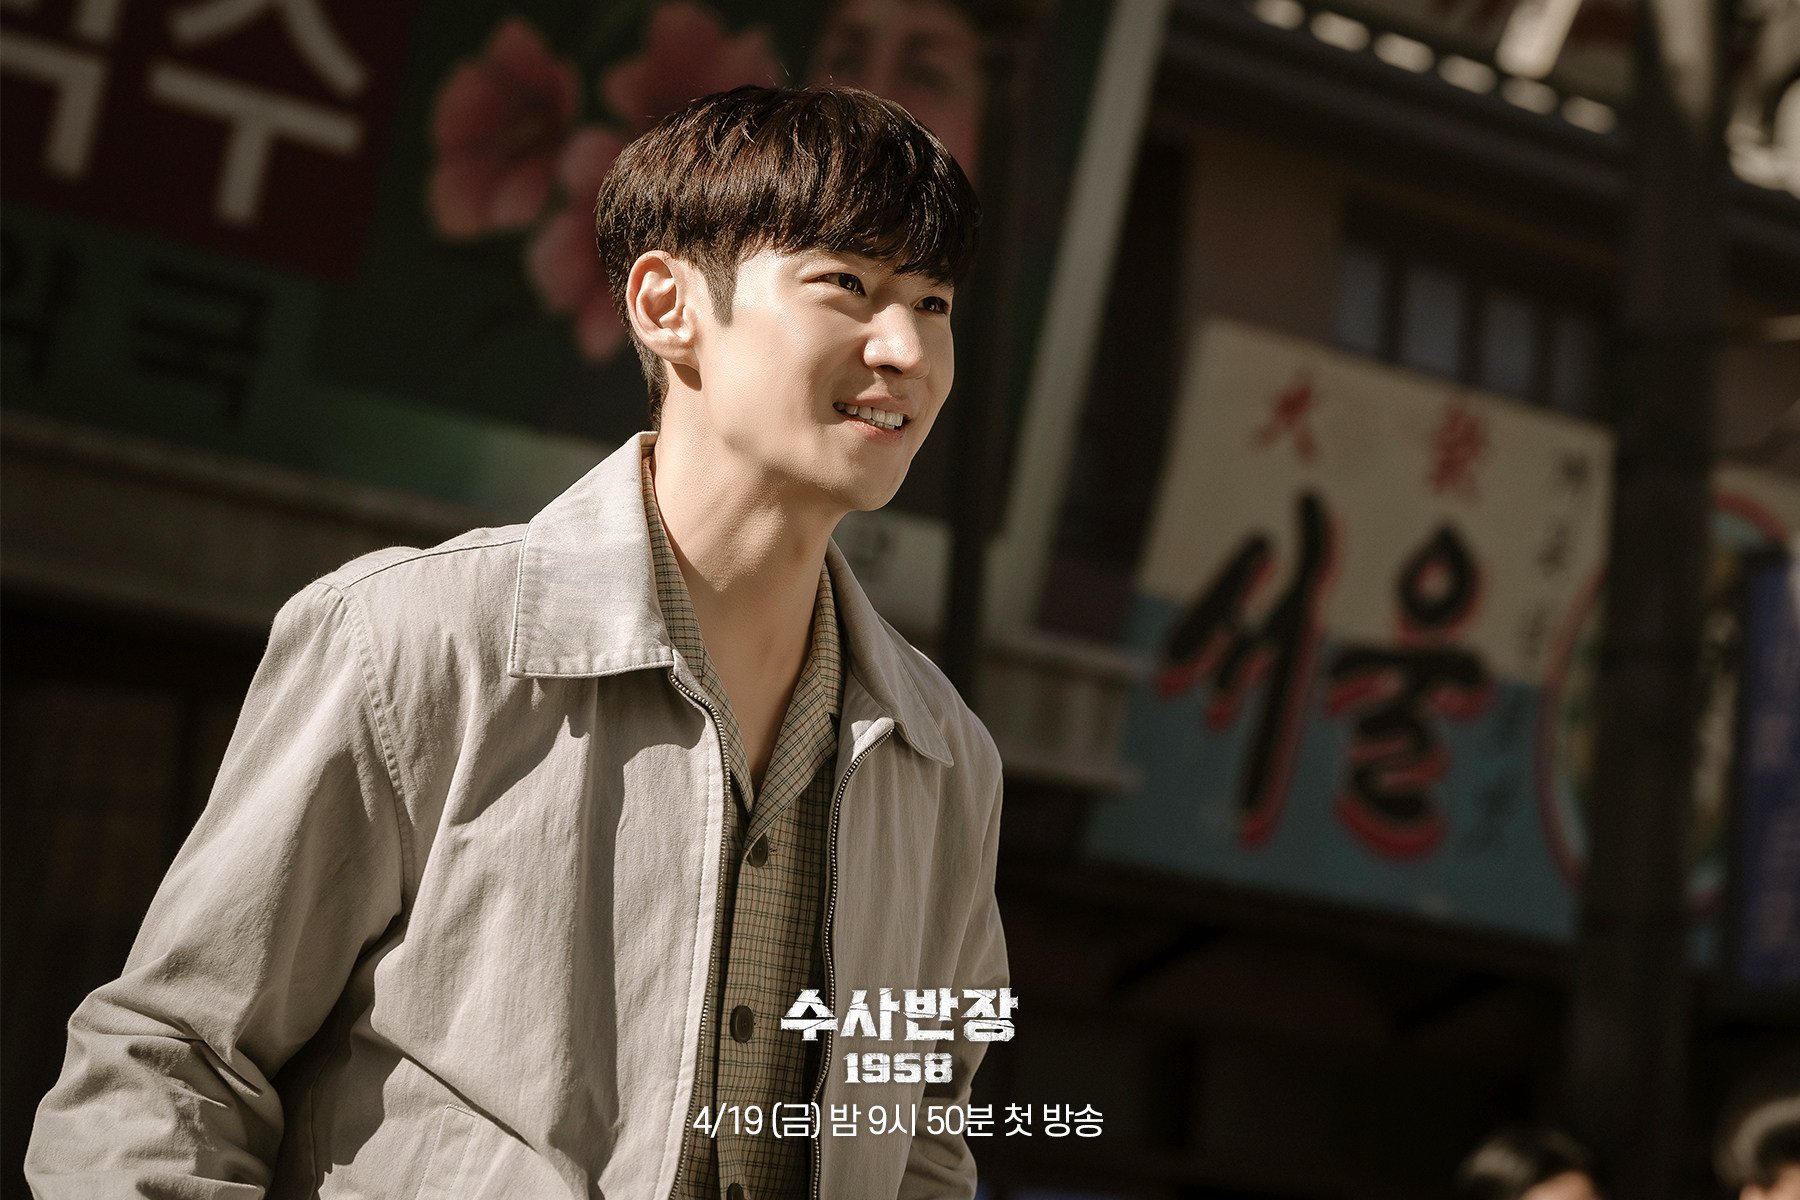 Lee Je-hoon as Detective Park Yeong-han in a still from Chief Detective 1958. The new Korean drama on Disney+ features a lead cast that includes Lee Dong-hwi, Choi Woo-sung, Yoon Hyun-soo and Seo Eun-soo.